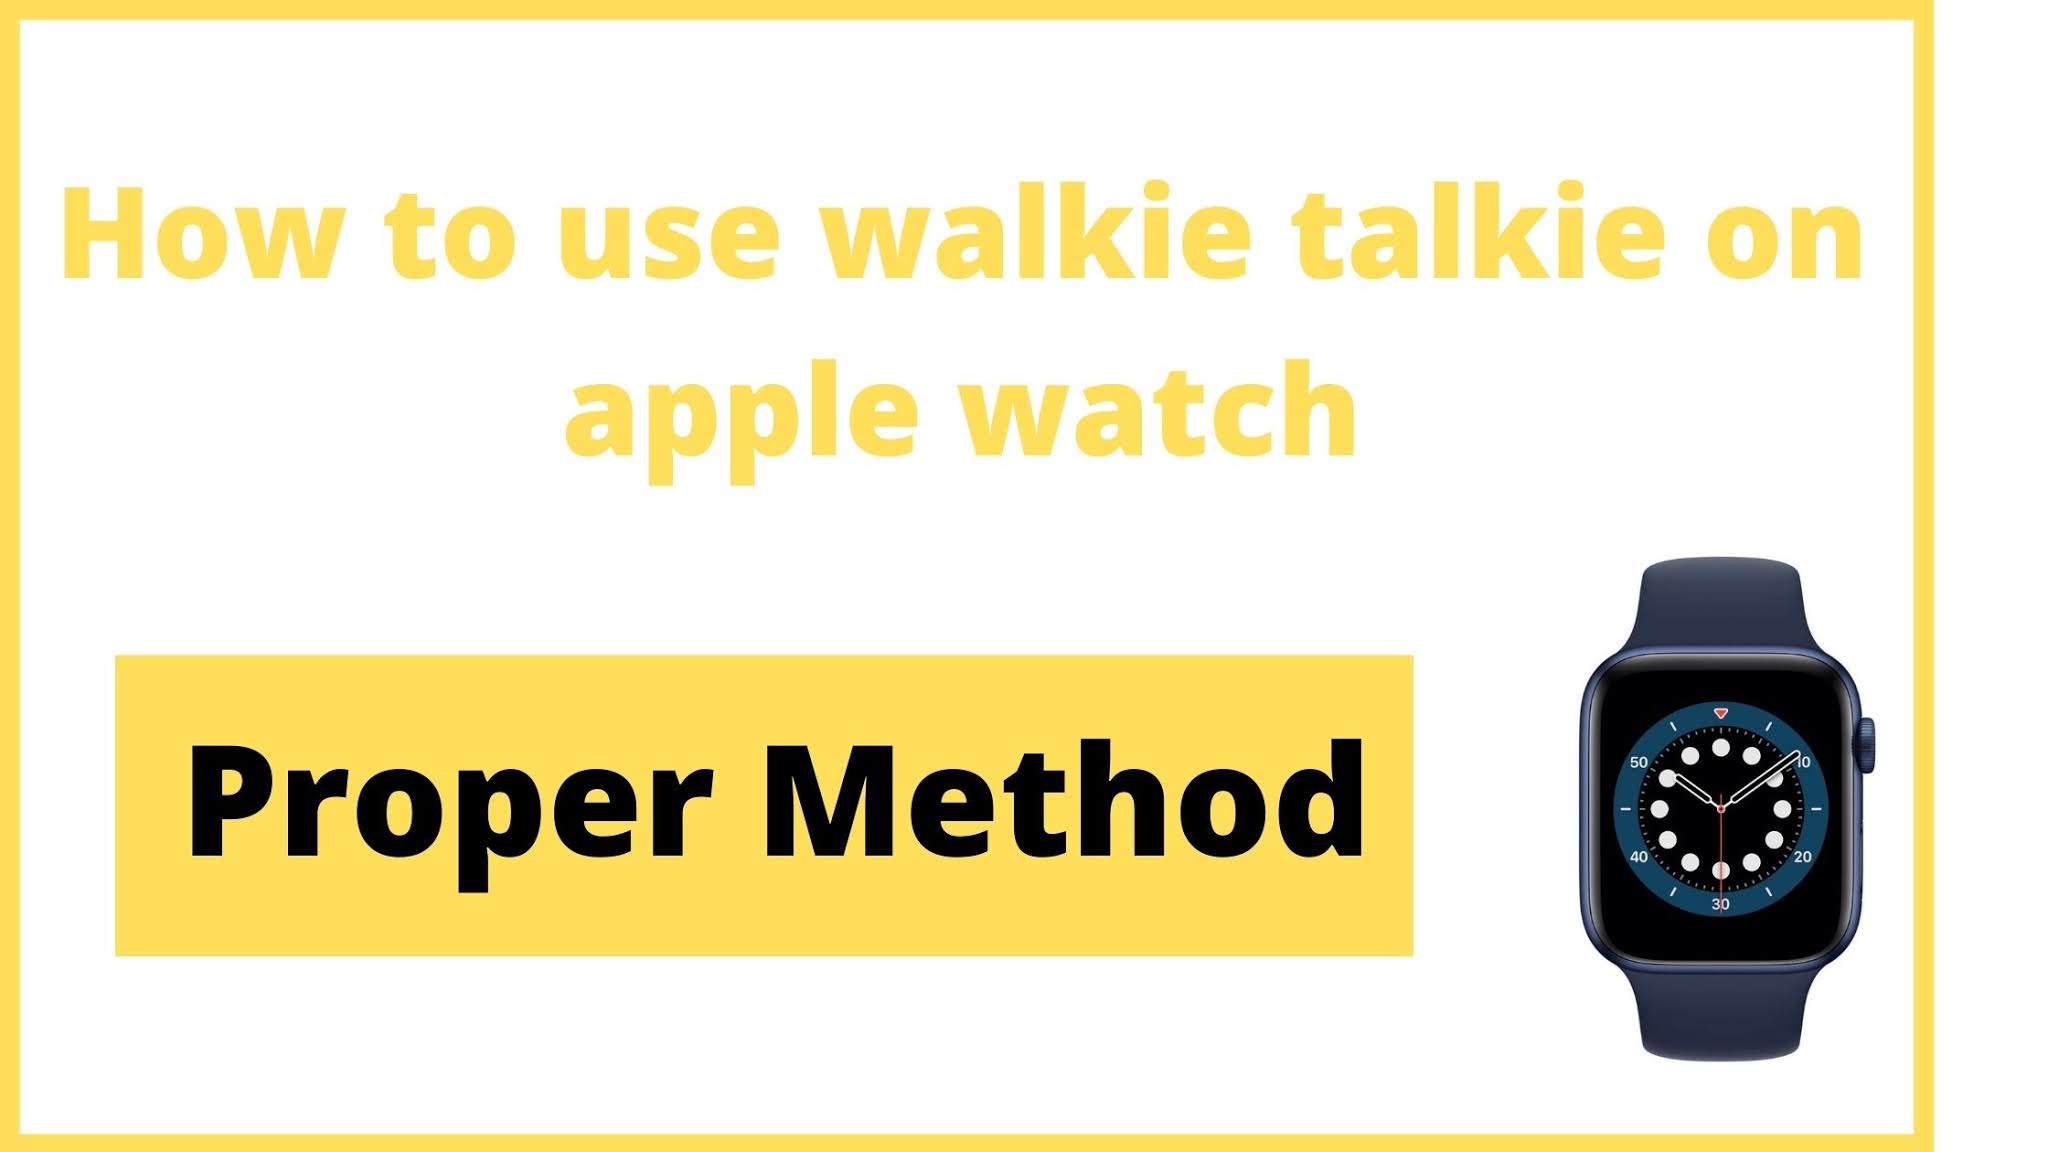 How to use walkie talkie on apple watch | How do you set up an Apple watch walkie talkie?